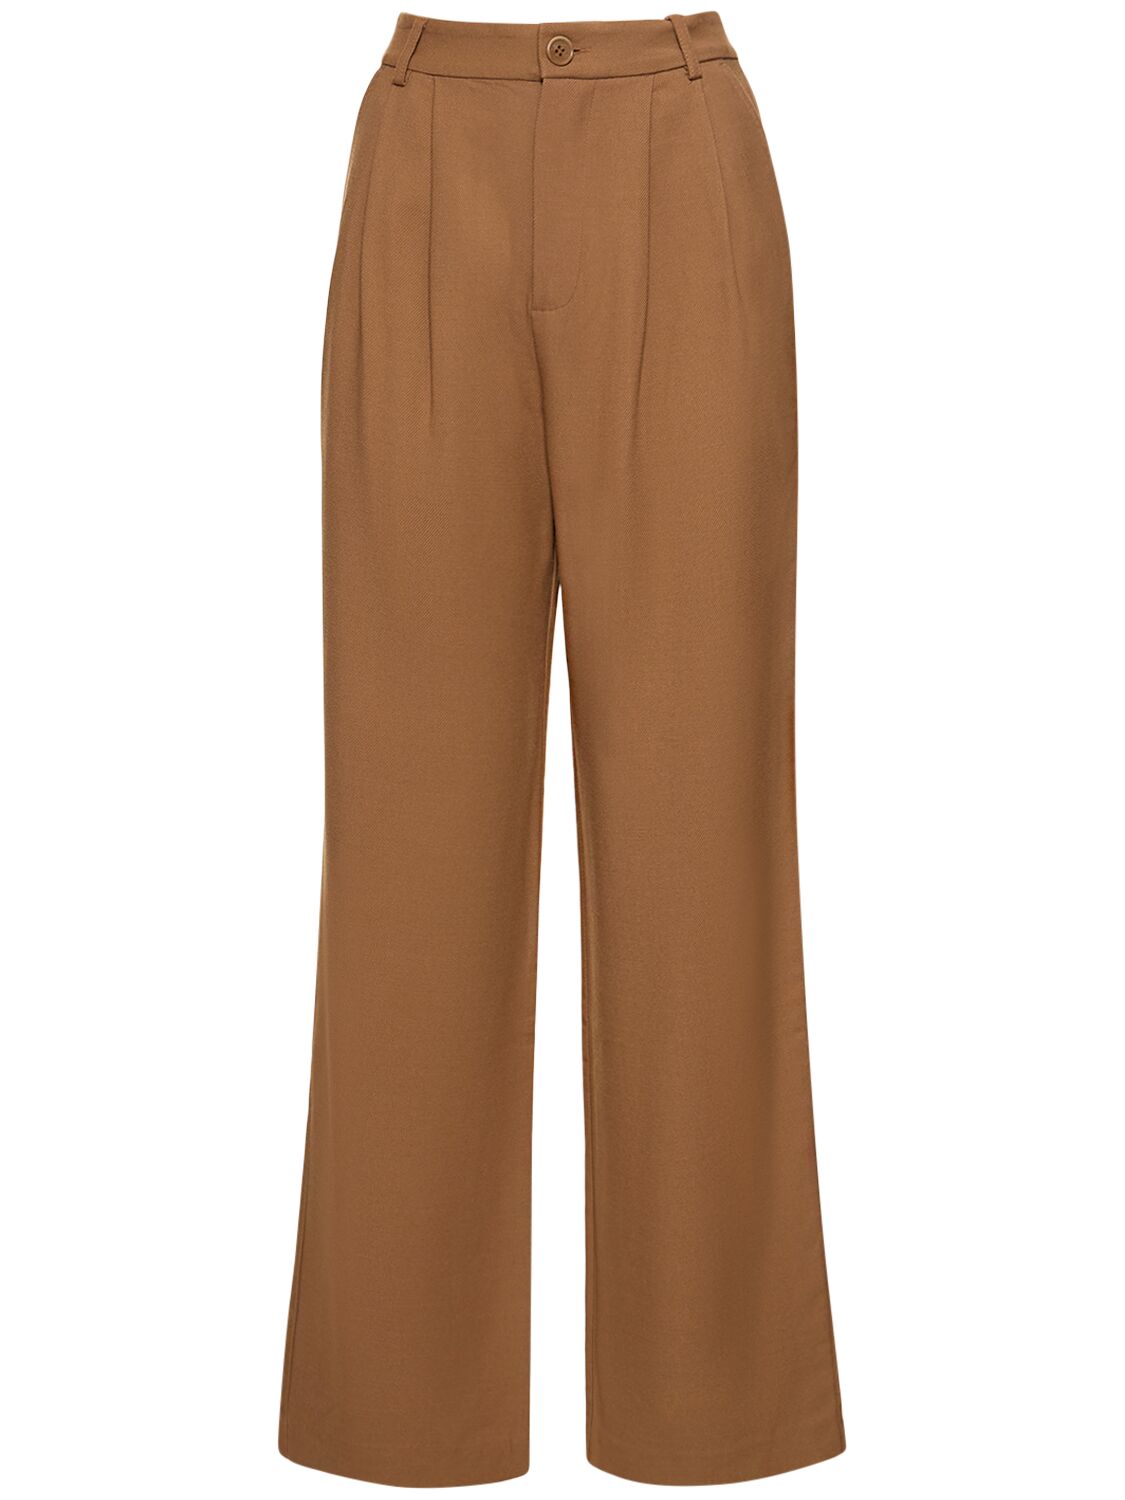 Anine Bing Carrie Viscose Blend Twill Pants In Brown